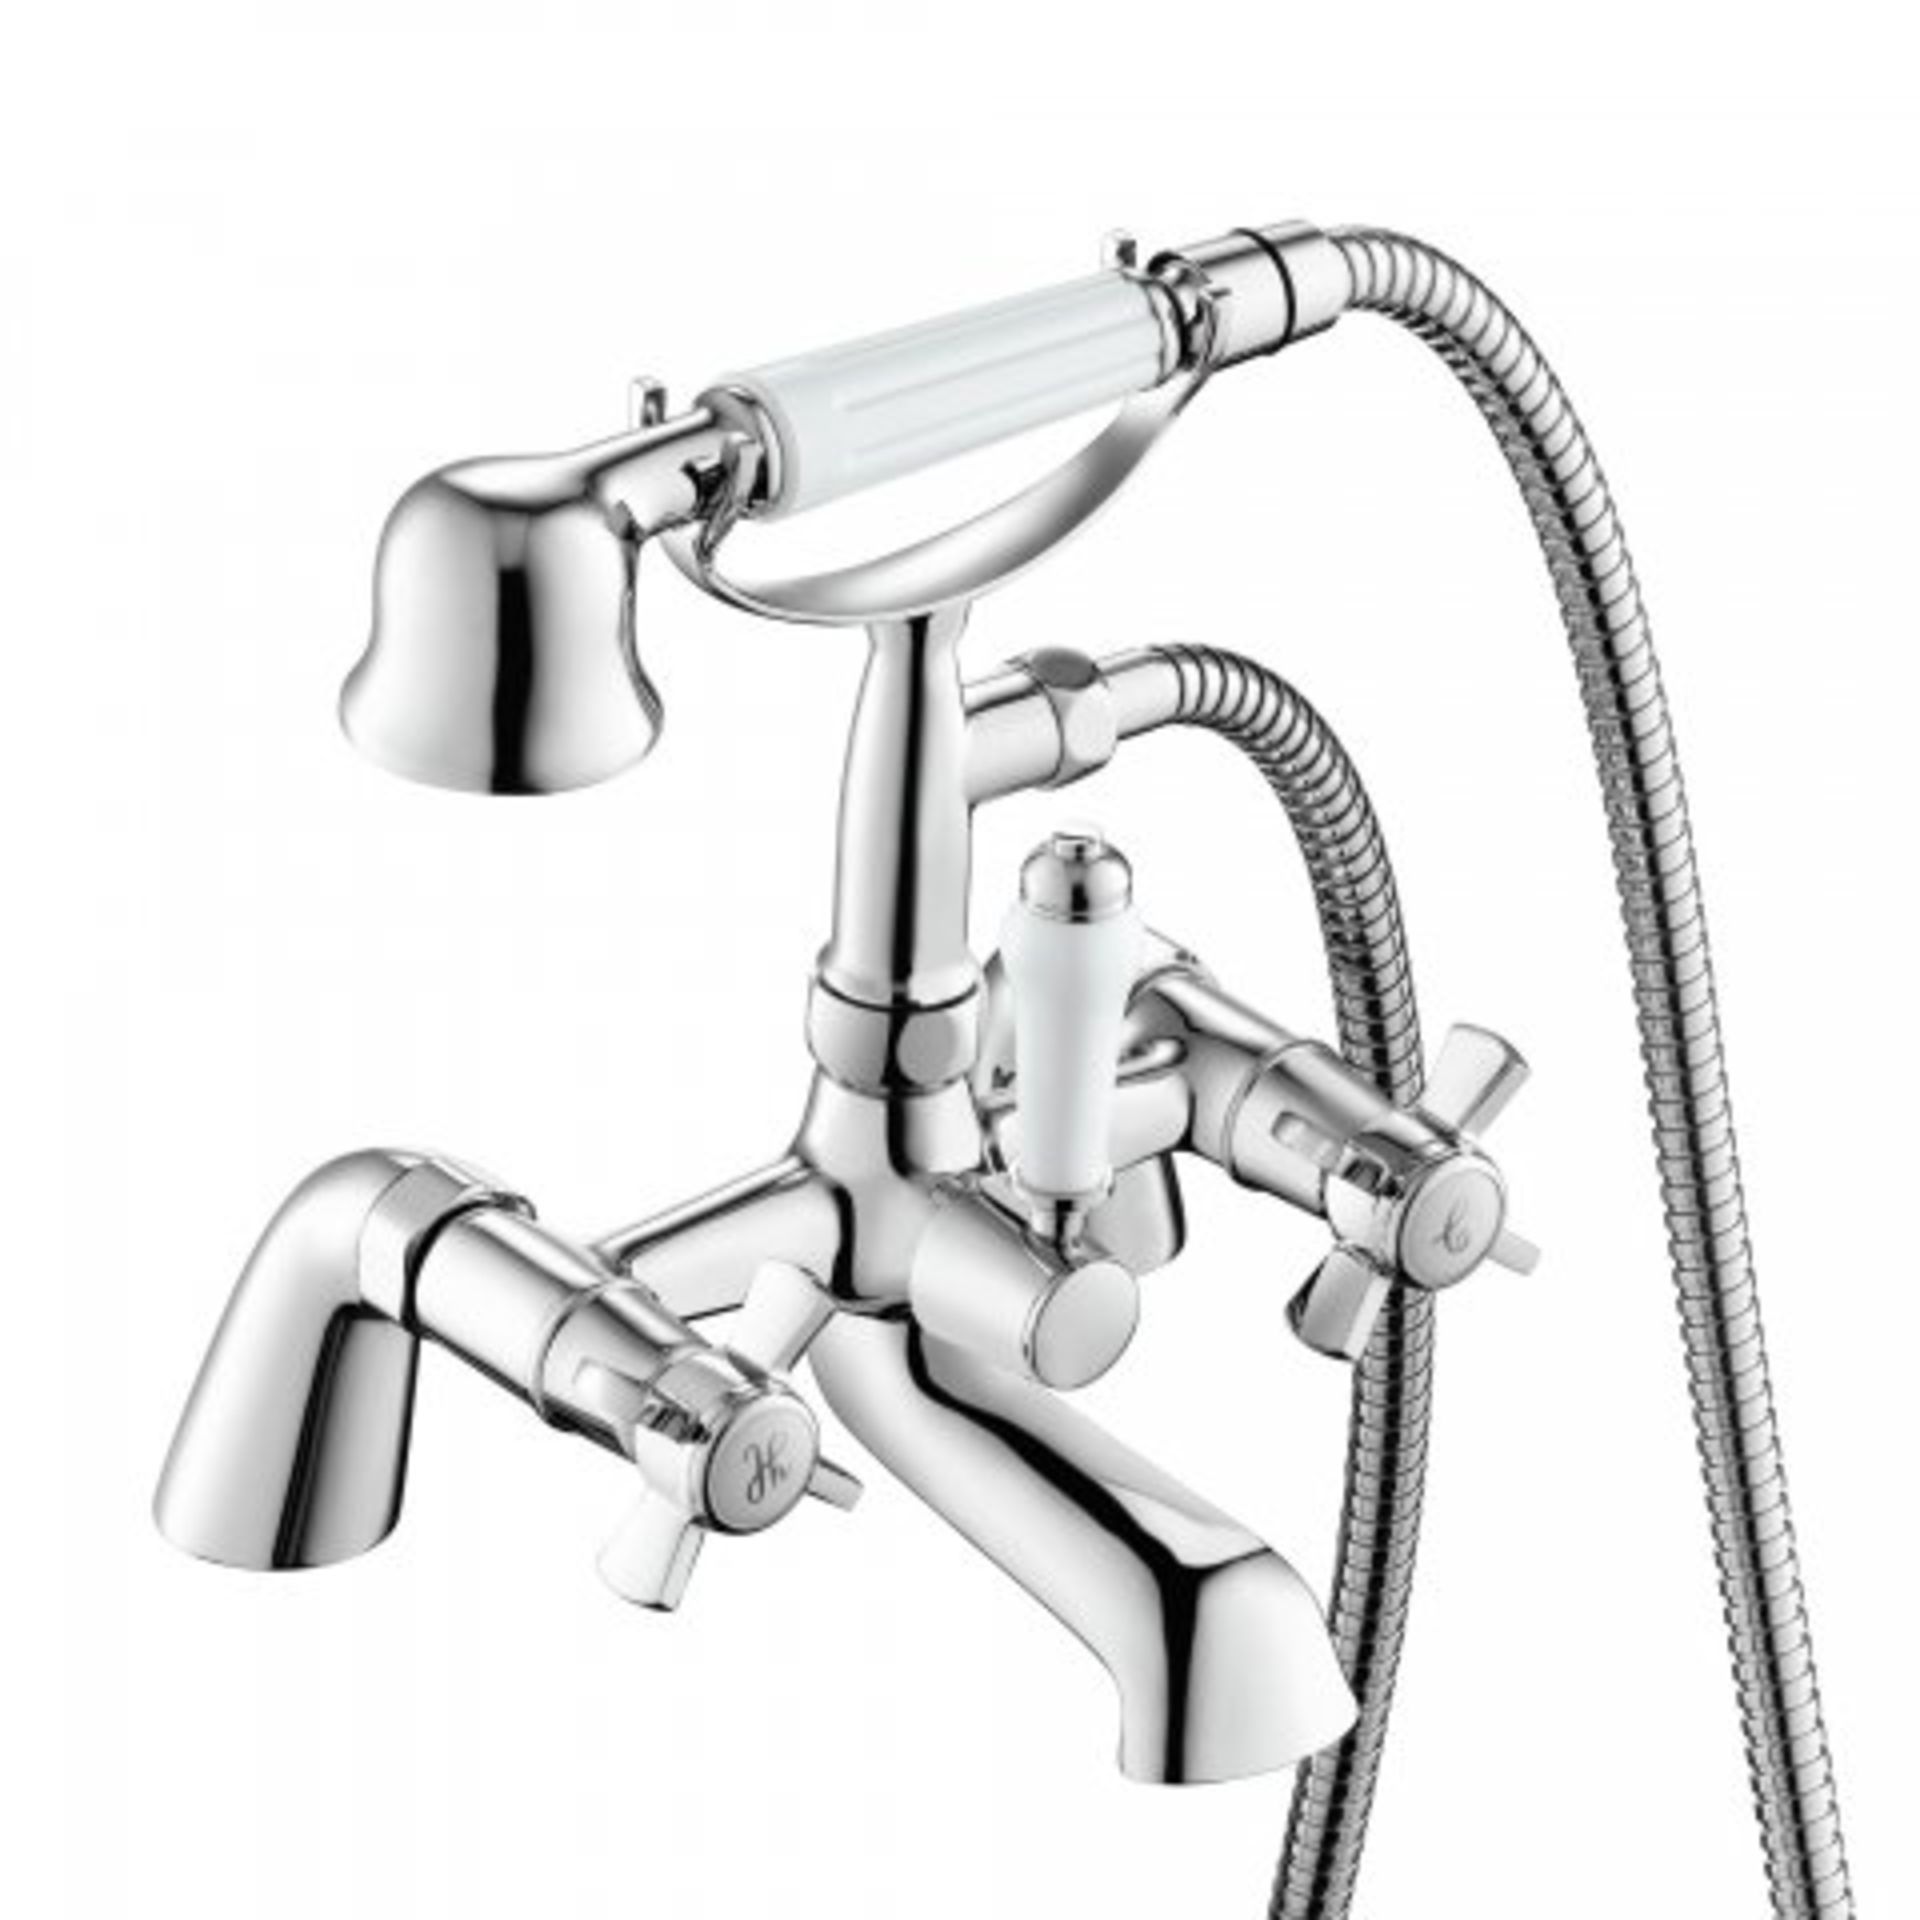 (I64) Cambridge Traditional Bath Mixer Tap with Hand Held Shower Our great range of traditional taps - Bild 5 aus 5